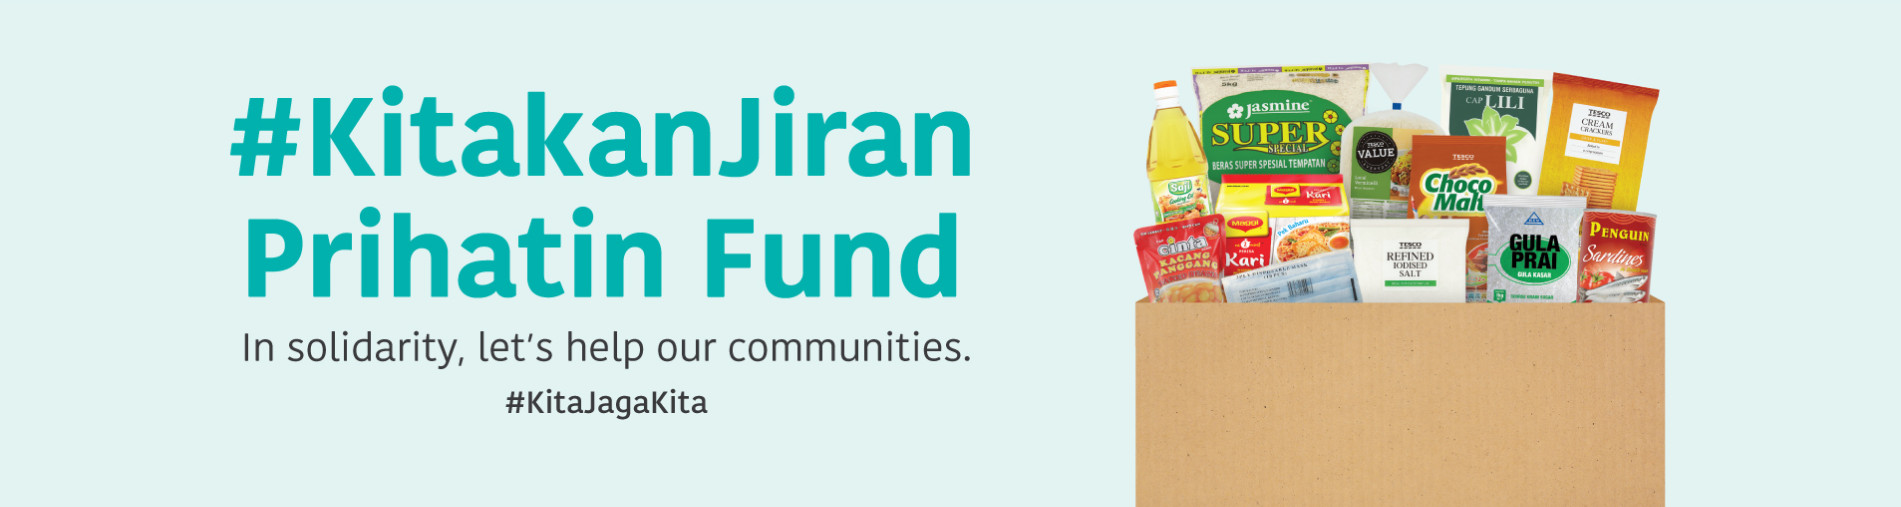 Lotus’s #KitakanJiran Prihatin Fundraiser— Coming together for our communities!